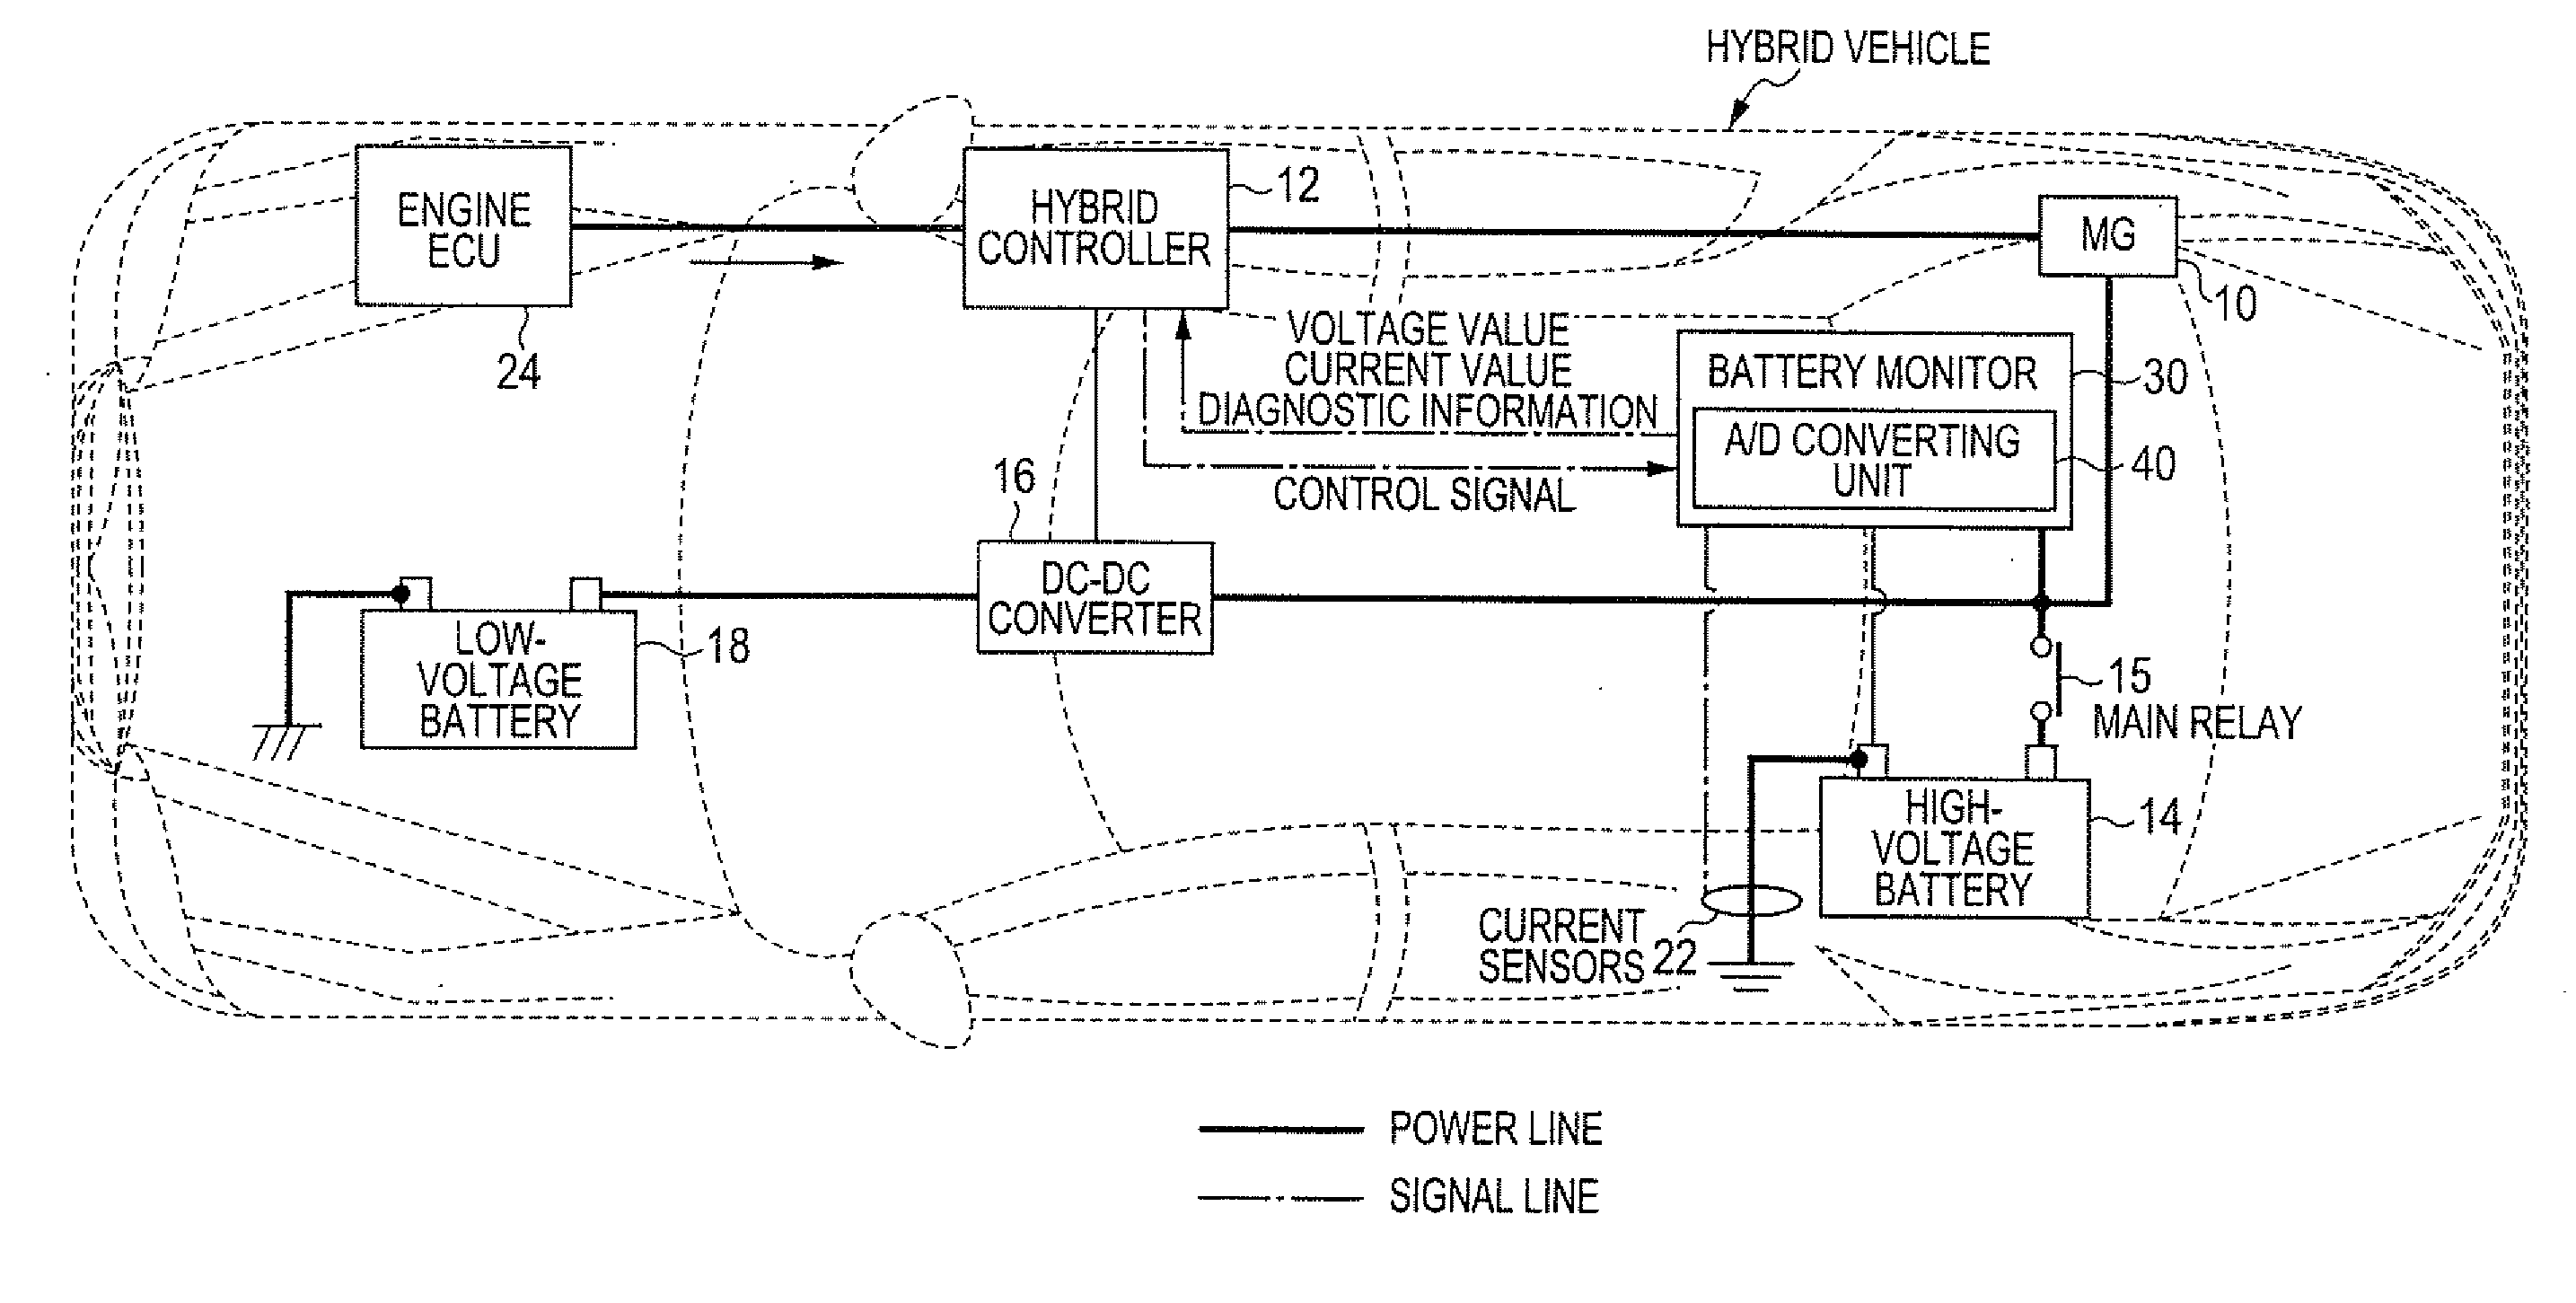 Device for converting analog signal into digital values and correcting the values